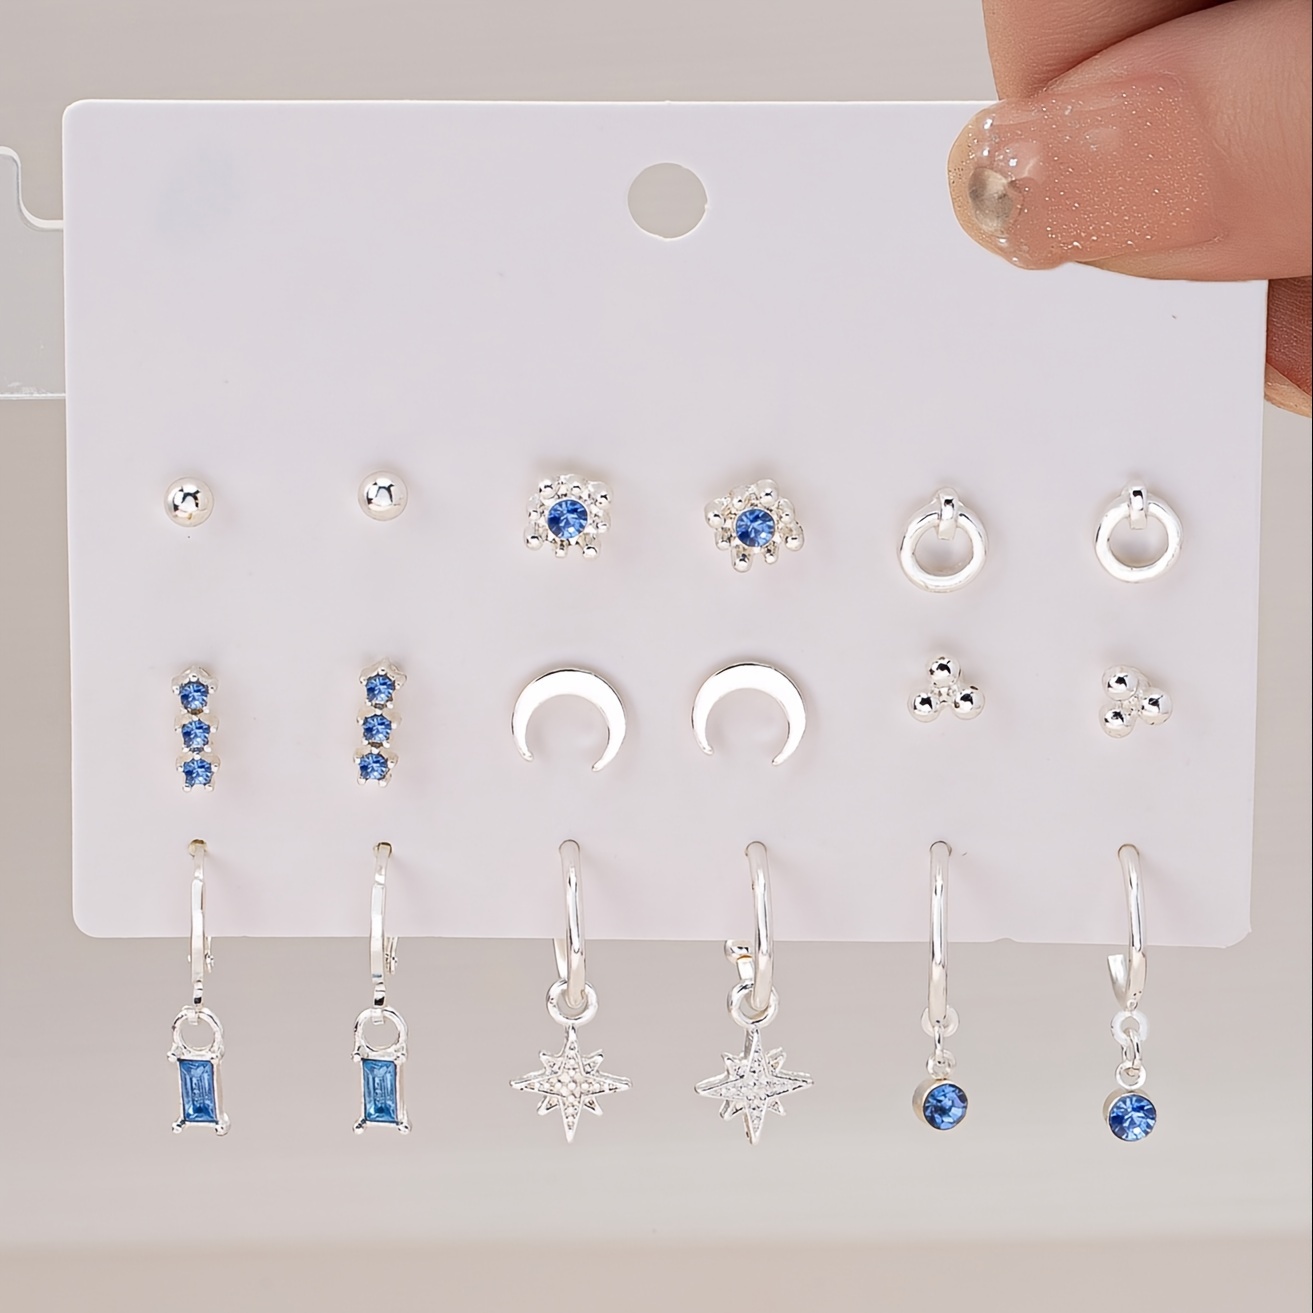 

Chic 9-piece Set: Silvery & Gold-plated Hoop Earrings With Light Blue Rhinestones - Moon, Star, And Bean Motifs - Perfect For Everyday Wear & Gifting